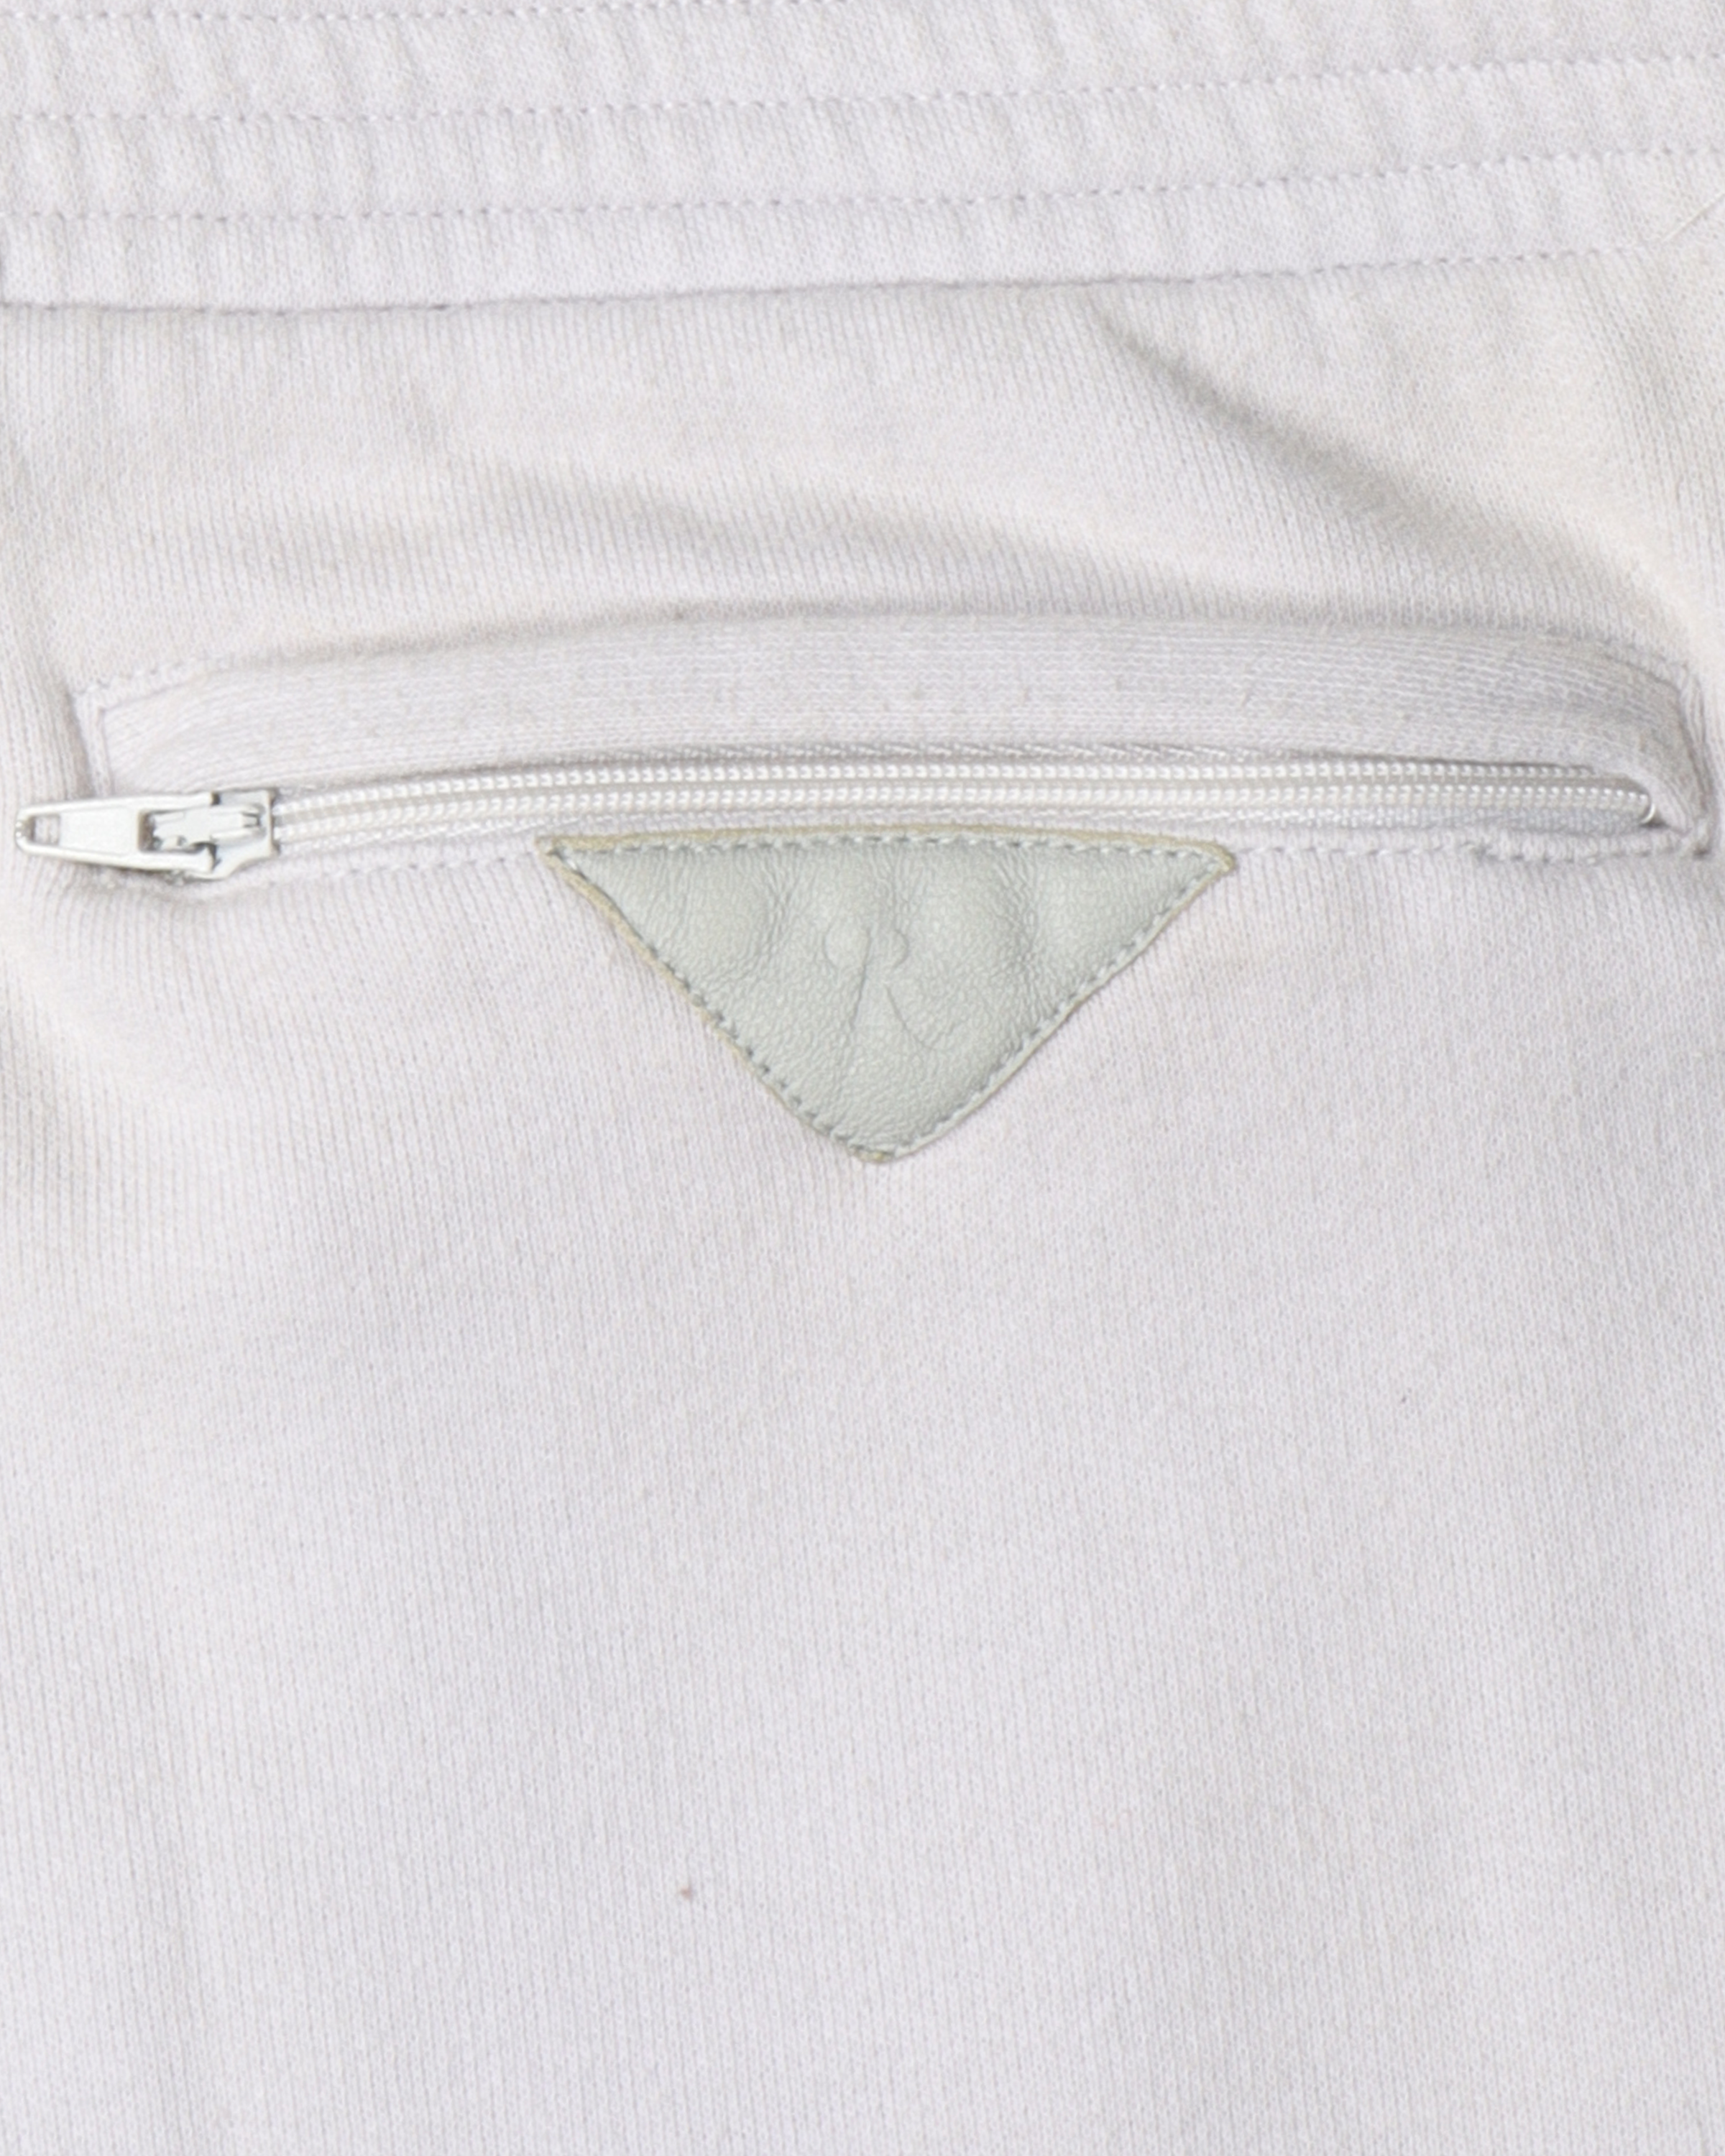 SS05 "History of The World" White Sweatpants